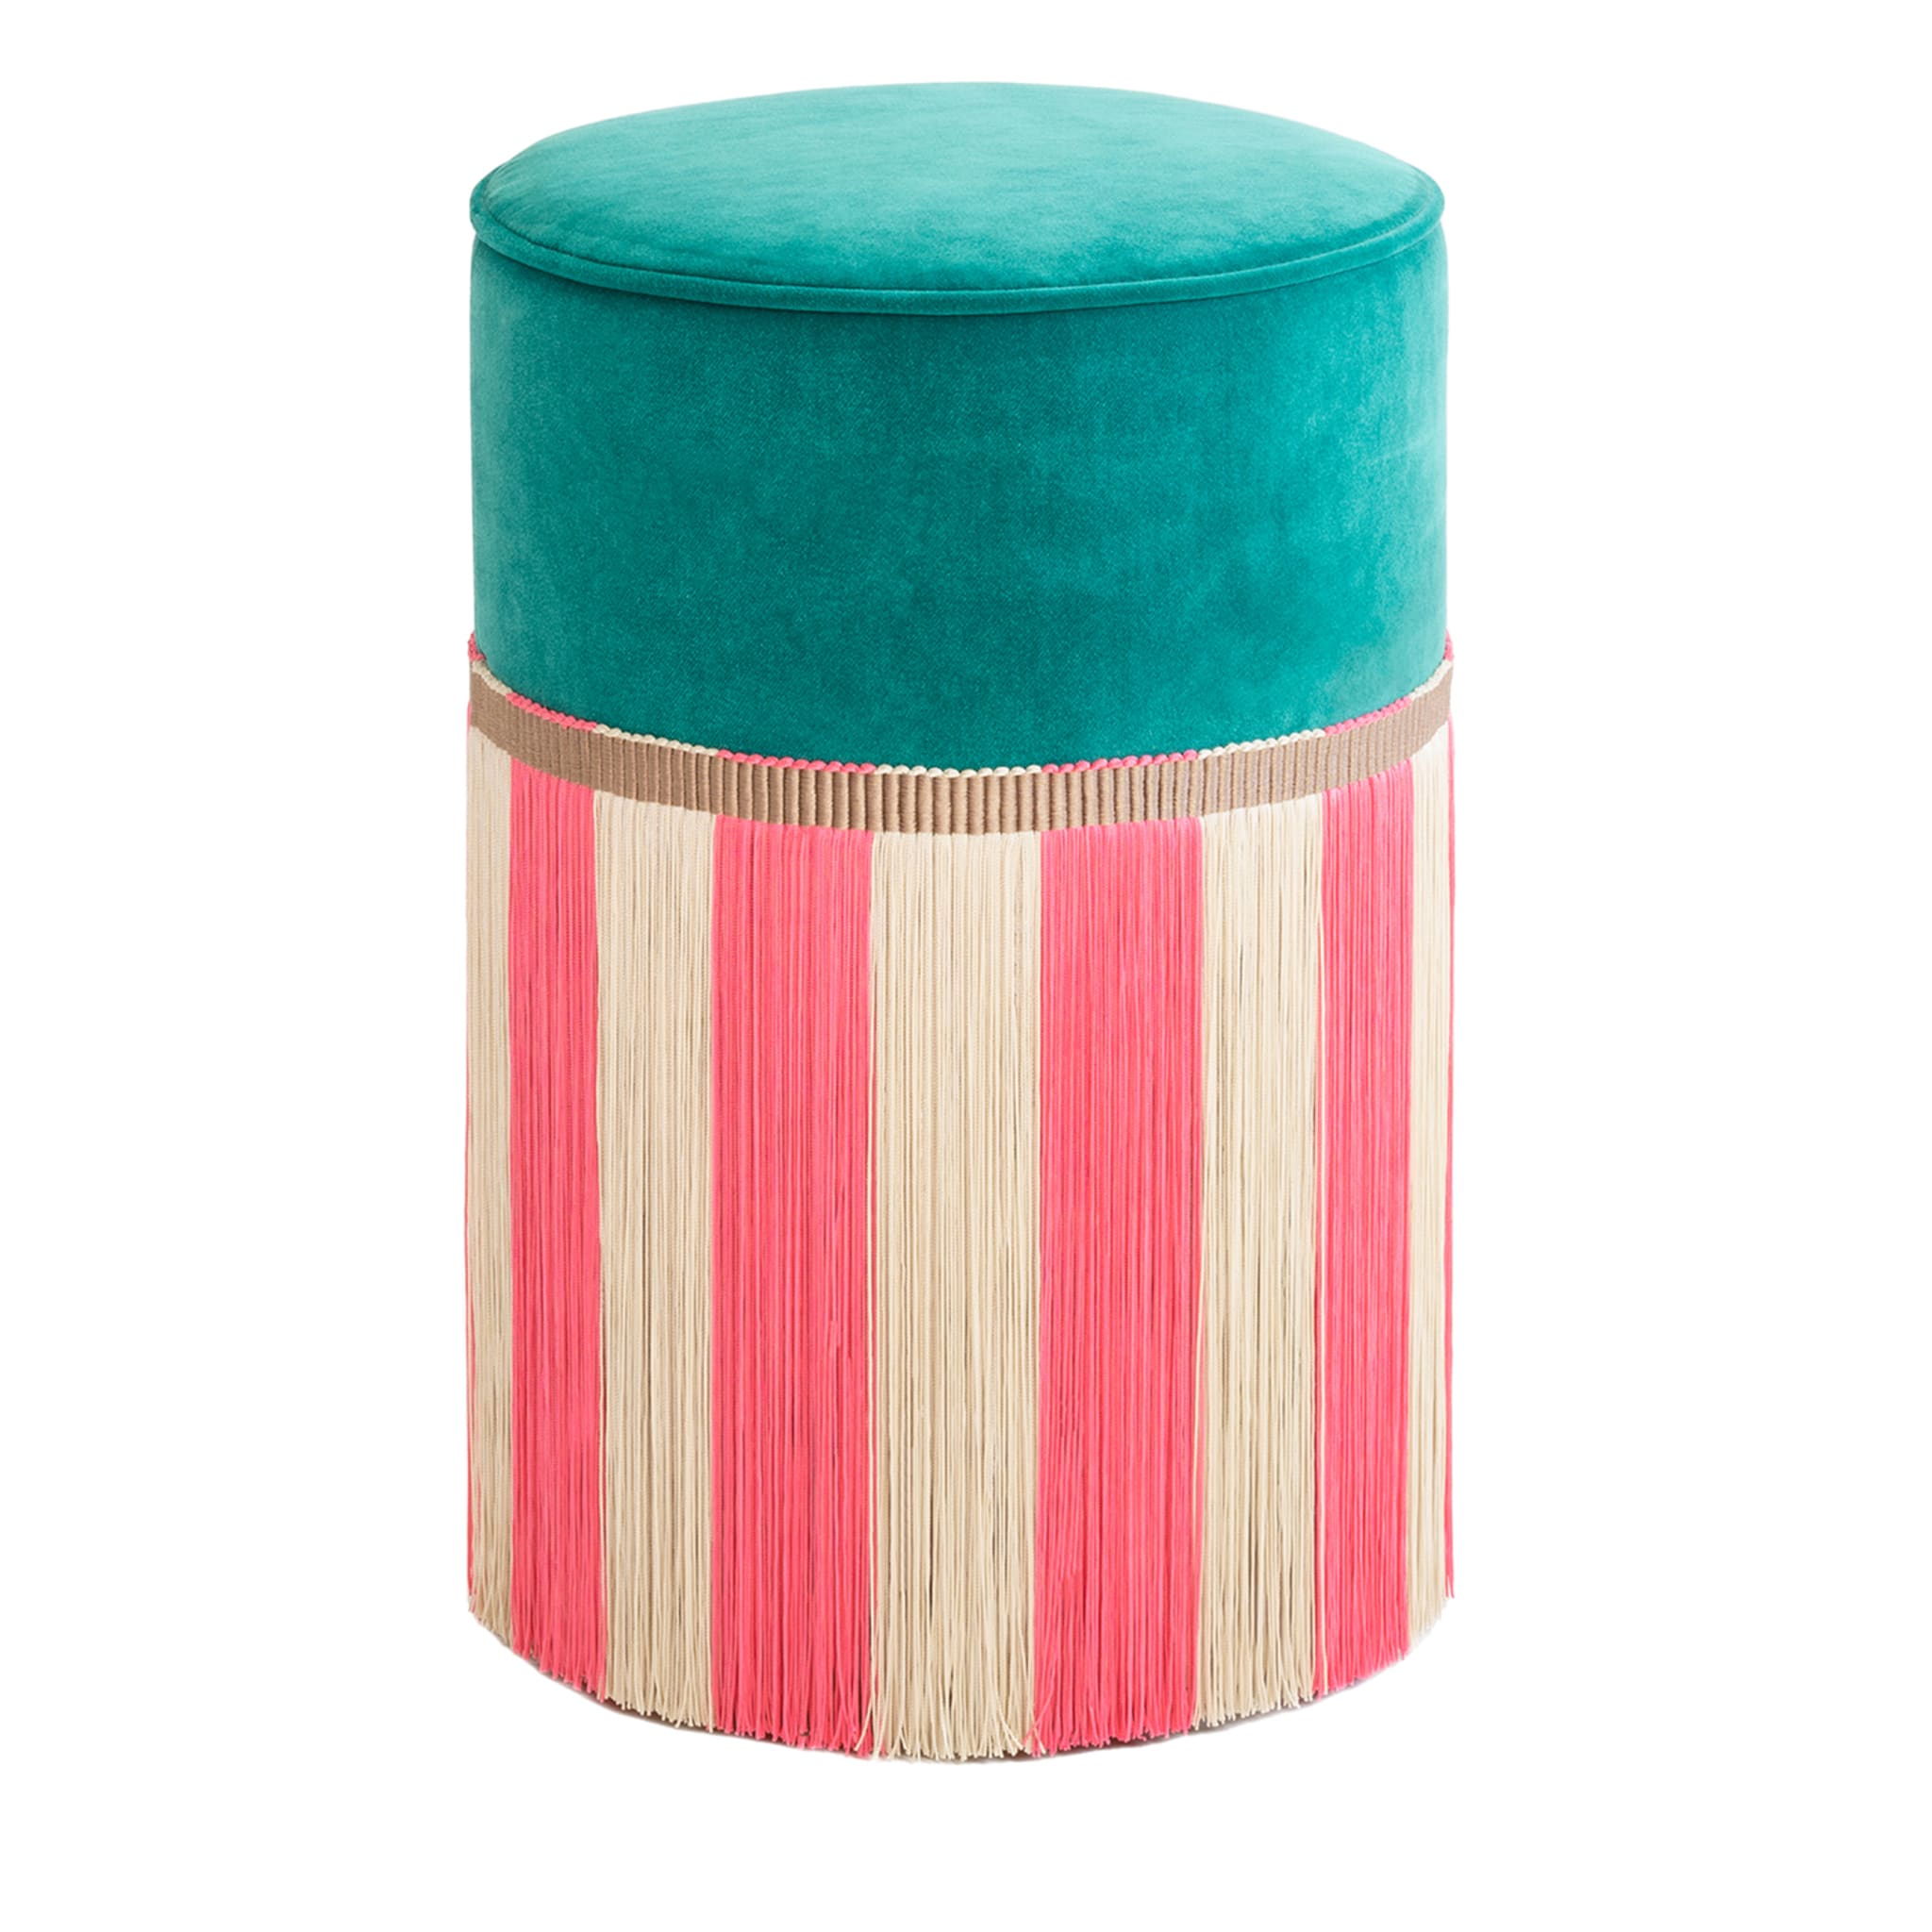 Couture Geometric Riga Small Turquoise & Pink Ottoman - Main view